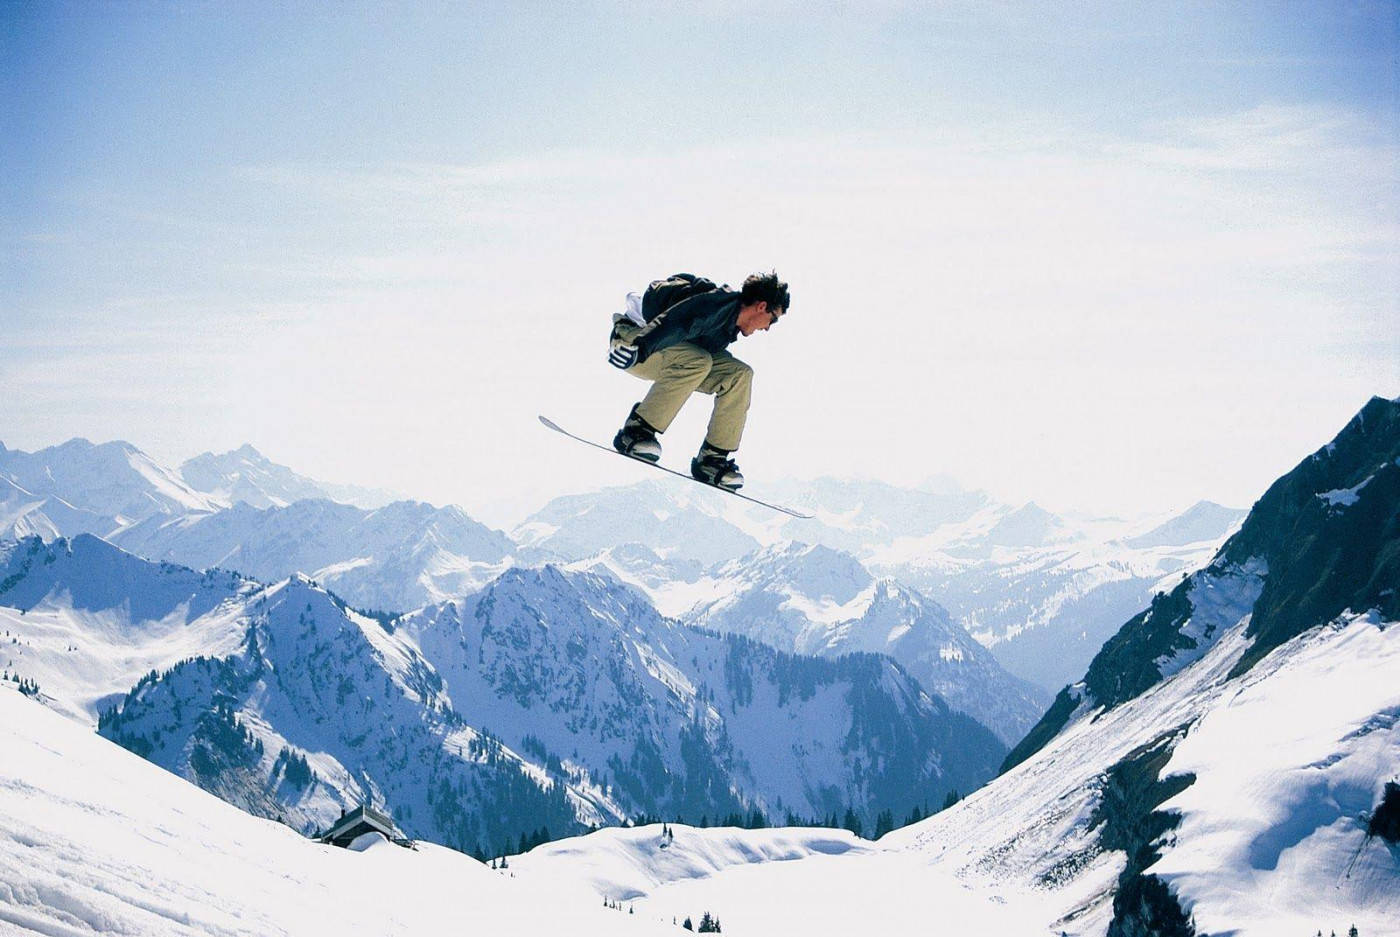 Man With Snowboard Descending With Mountainous Backdrop Picture